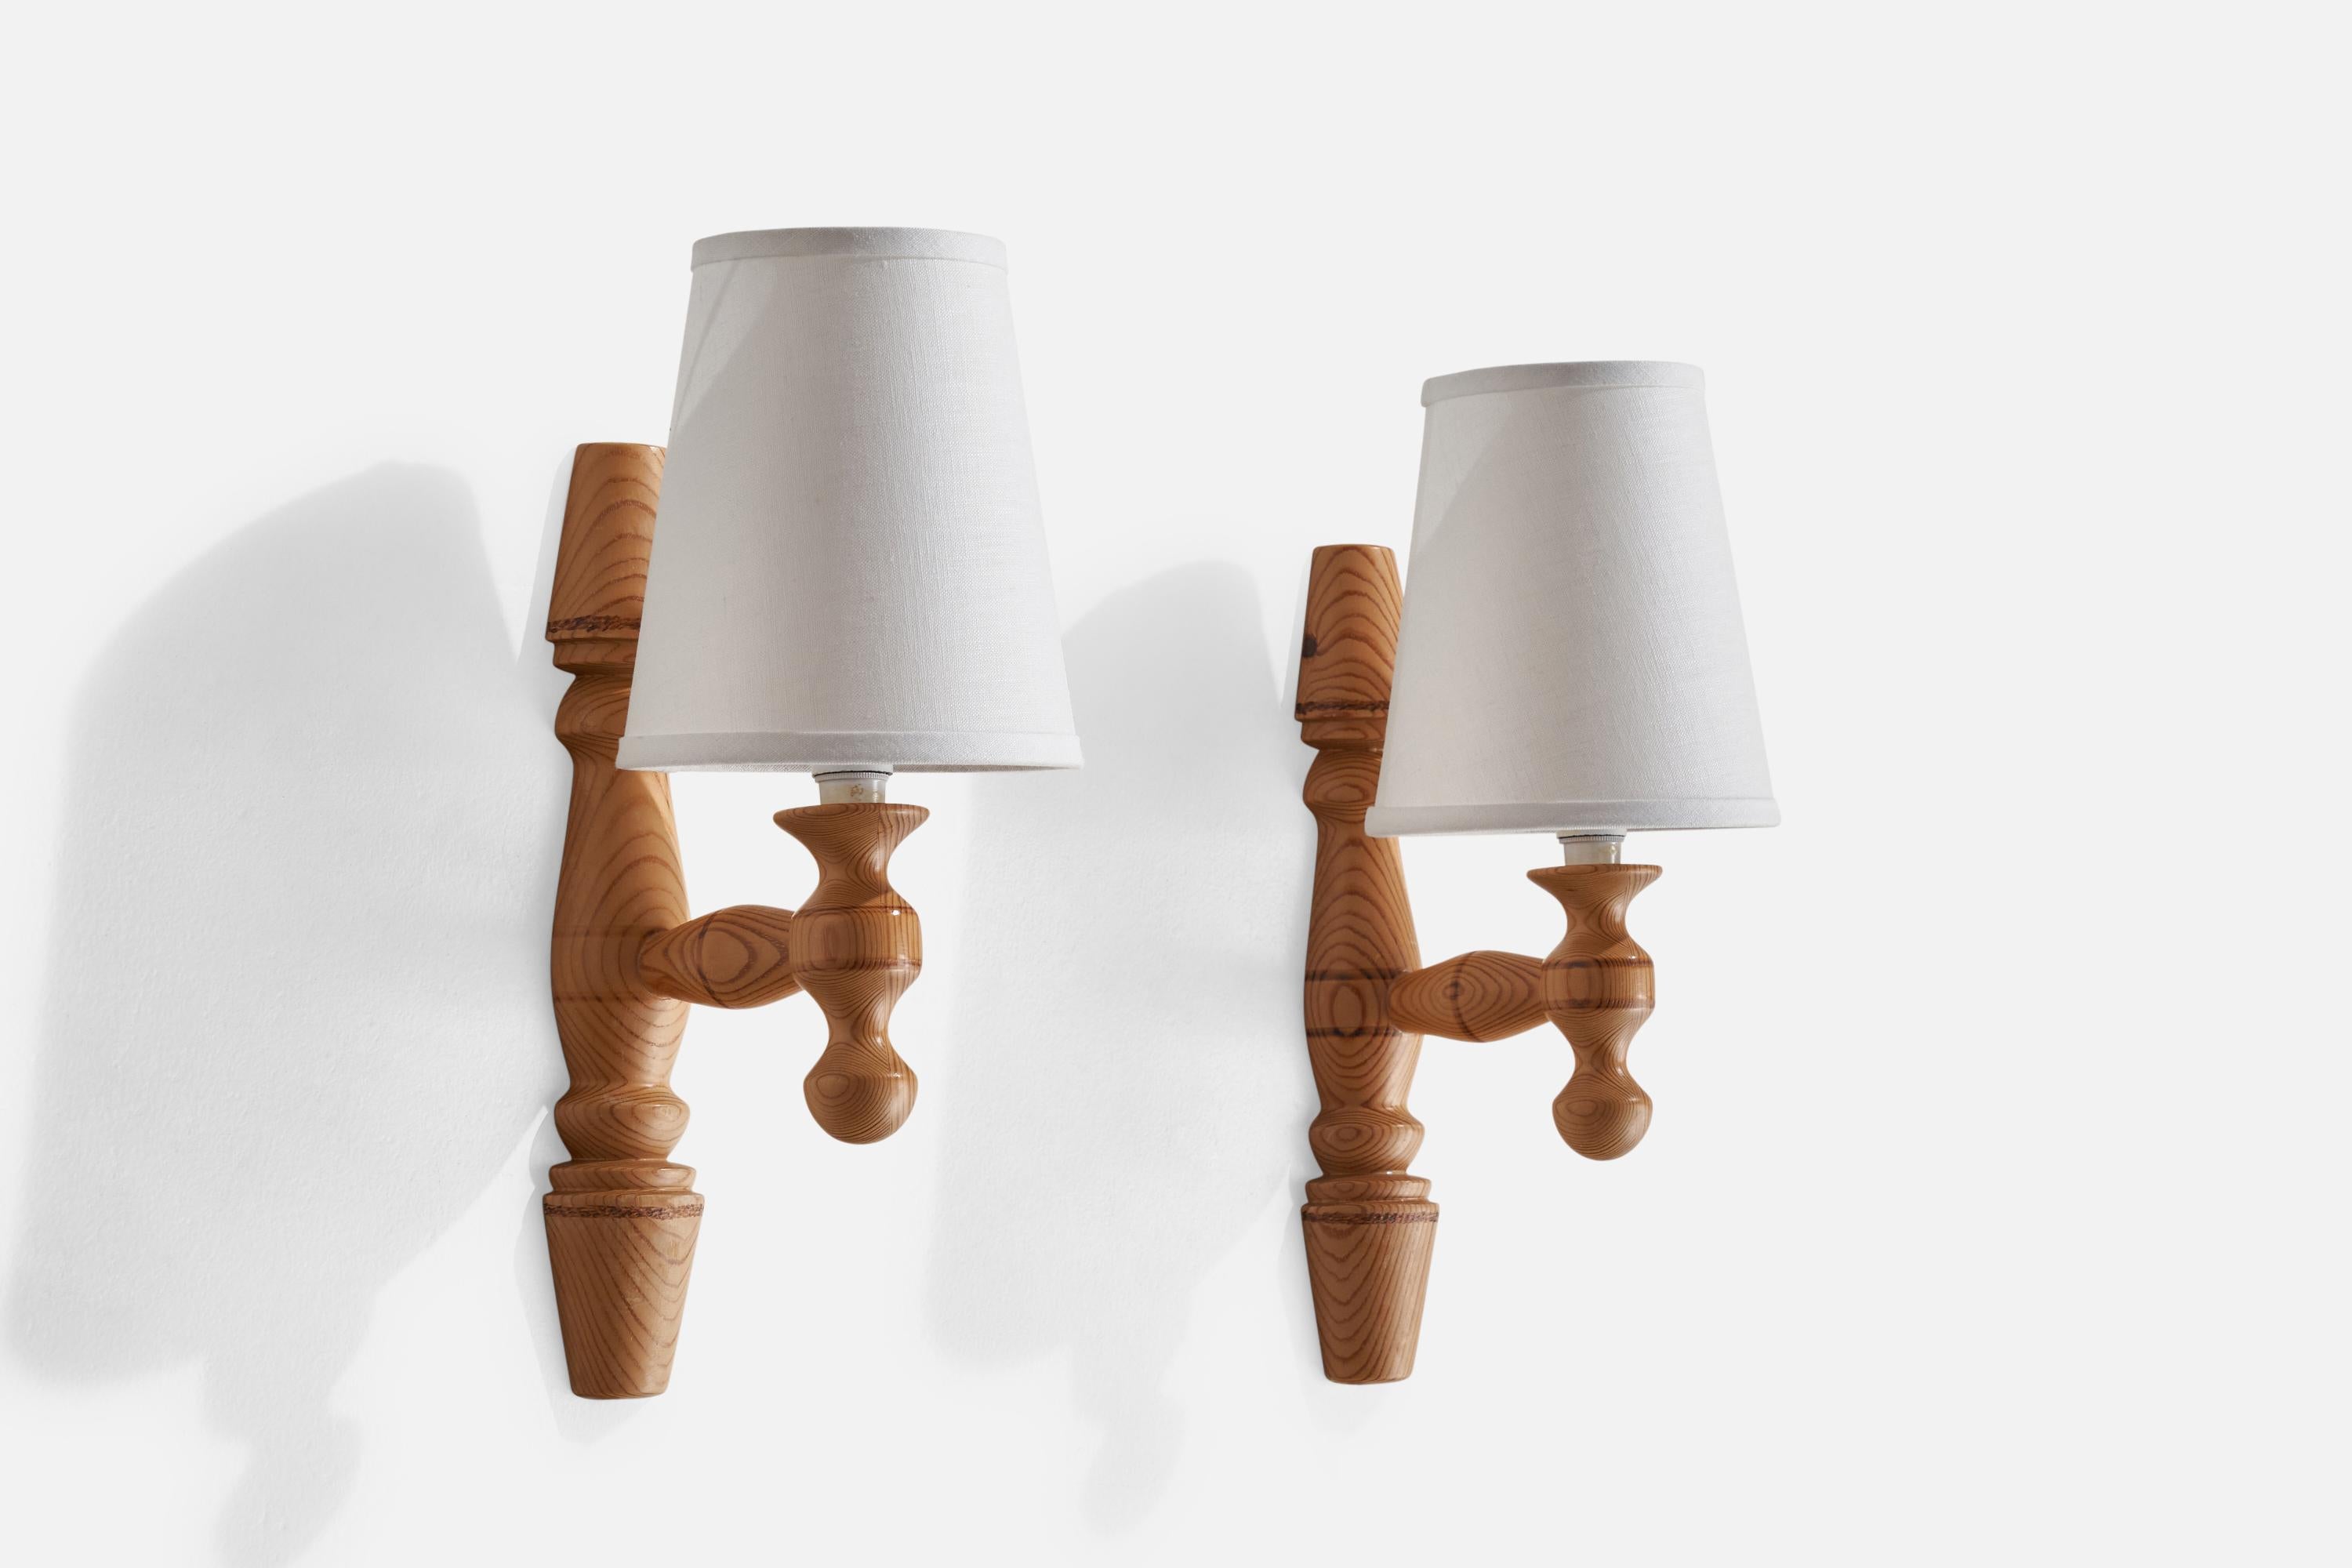 A pair of pine and fabric wall lights designed and produced in Sweden, 1970s.

Overall Dimensions (inches): 13.2” H x 2.5” W x 6.1” D
Back Plate Dimensions (inches): n/a
Bulb Specifications: E-14 Bulbs
Number of Sockets: 2
All lighting will be